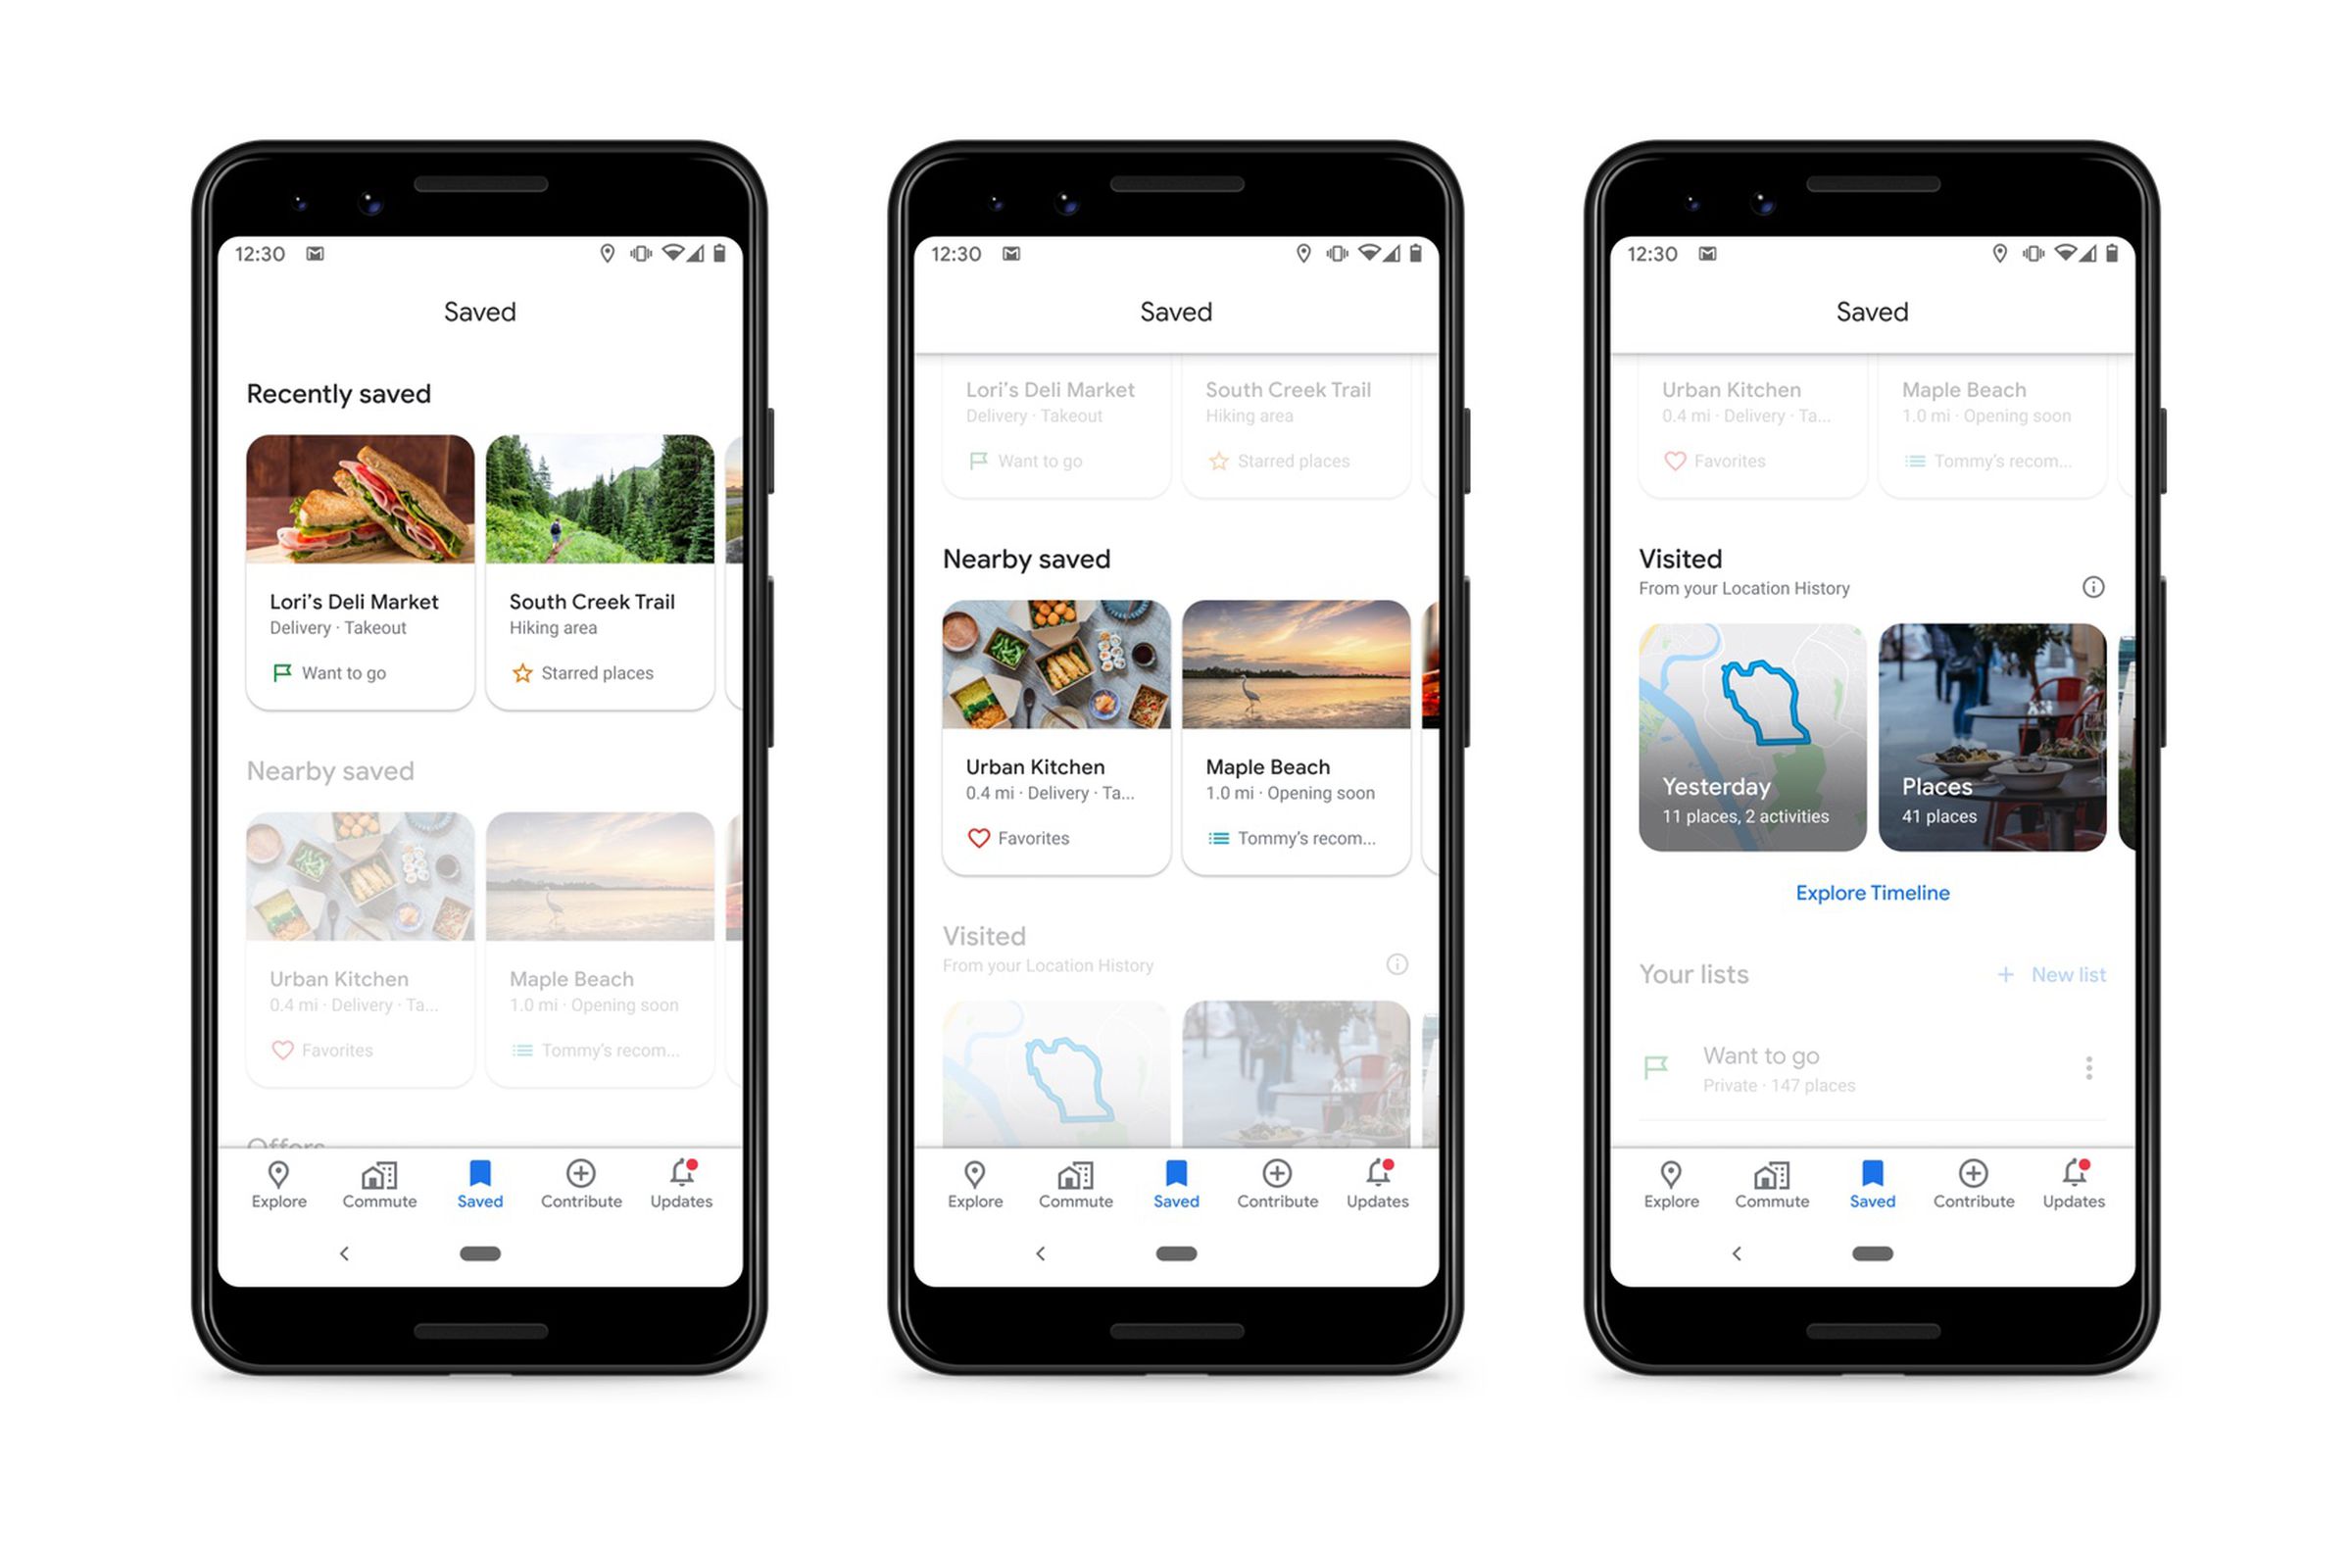 The update makes it easier to find saved places in Google Maps. You can sort by “recently saved,” “nearby saved,” and places you’ve visited but not saved.